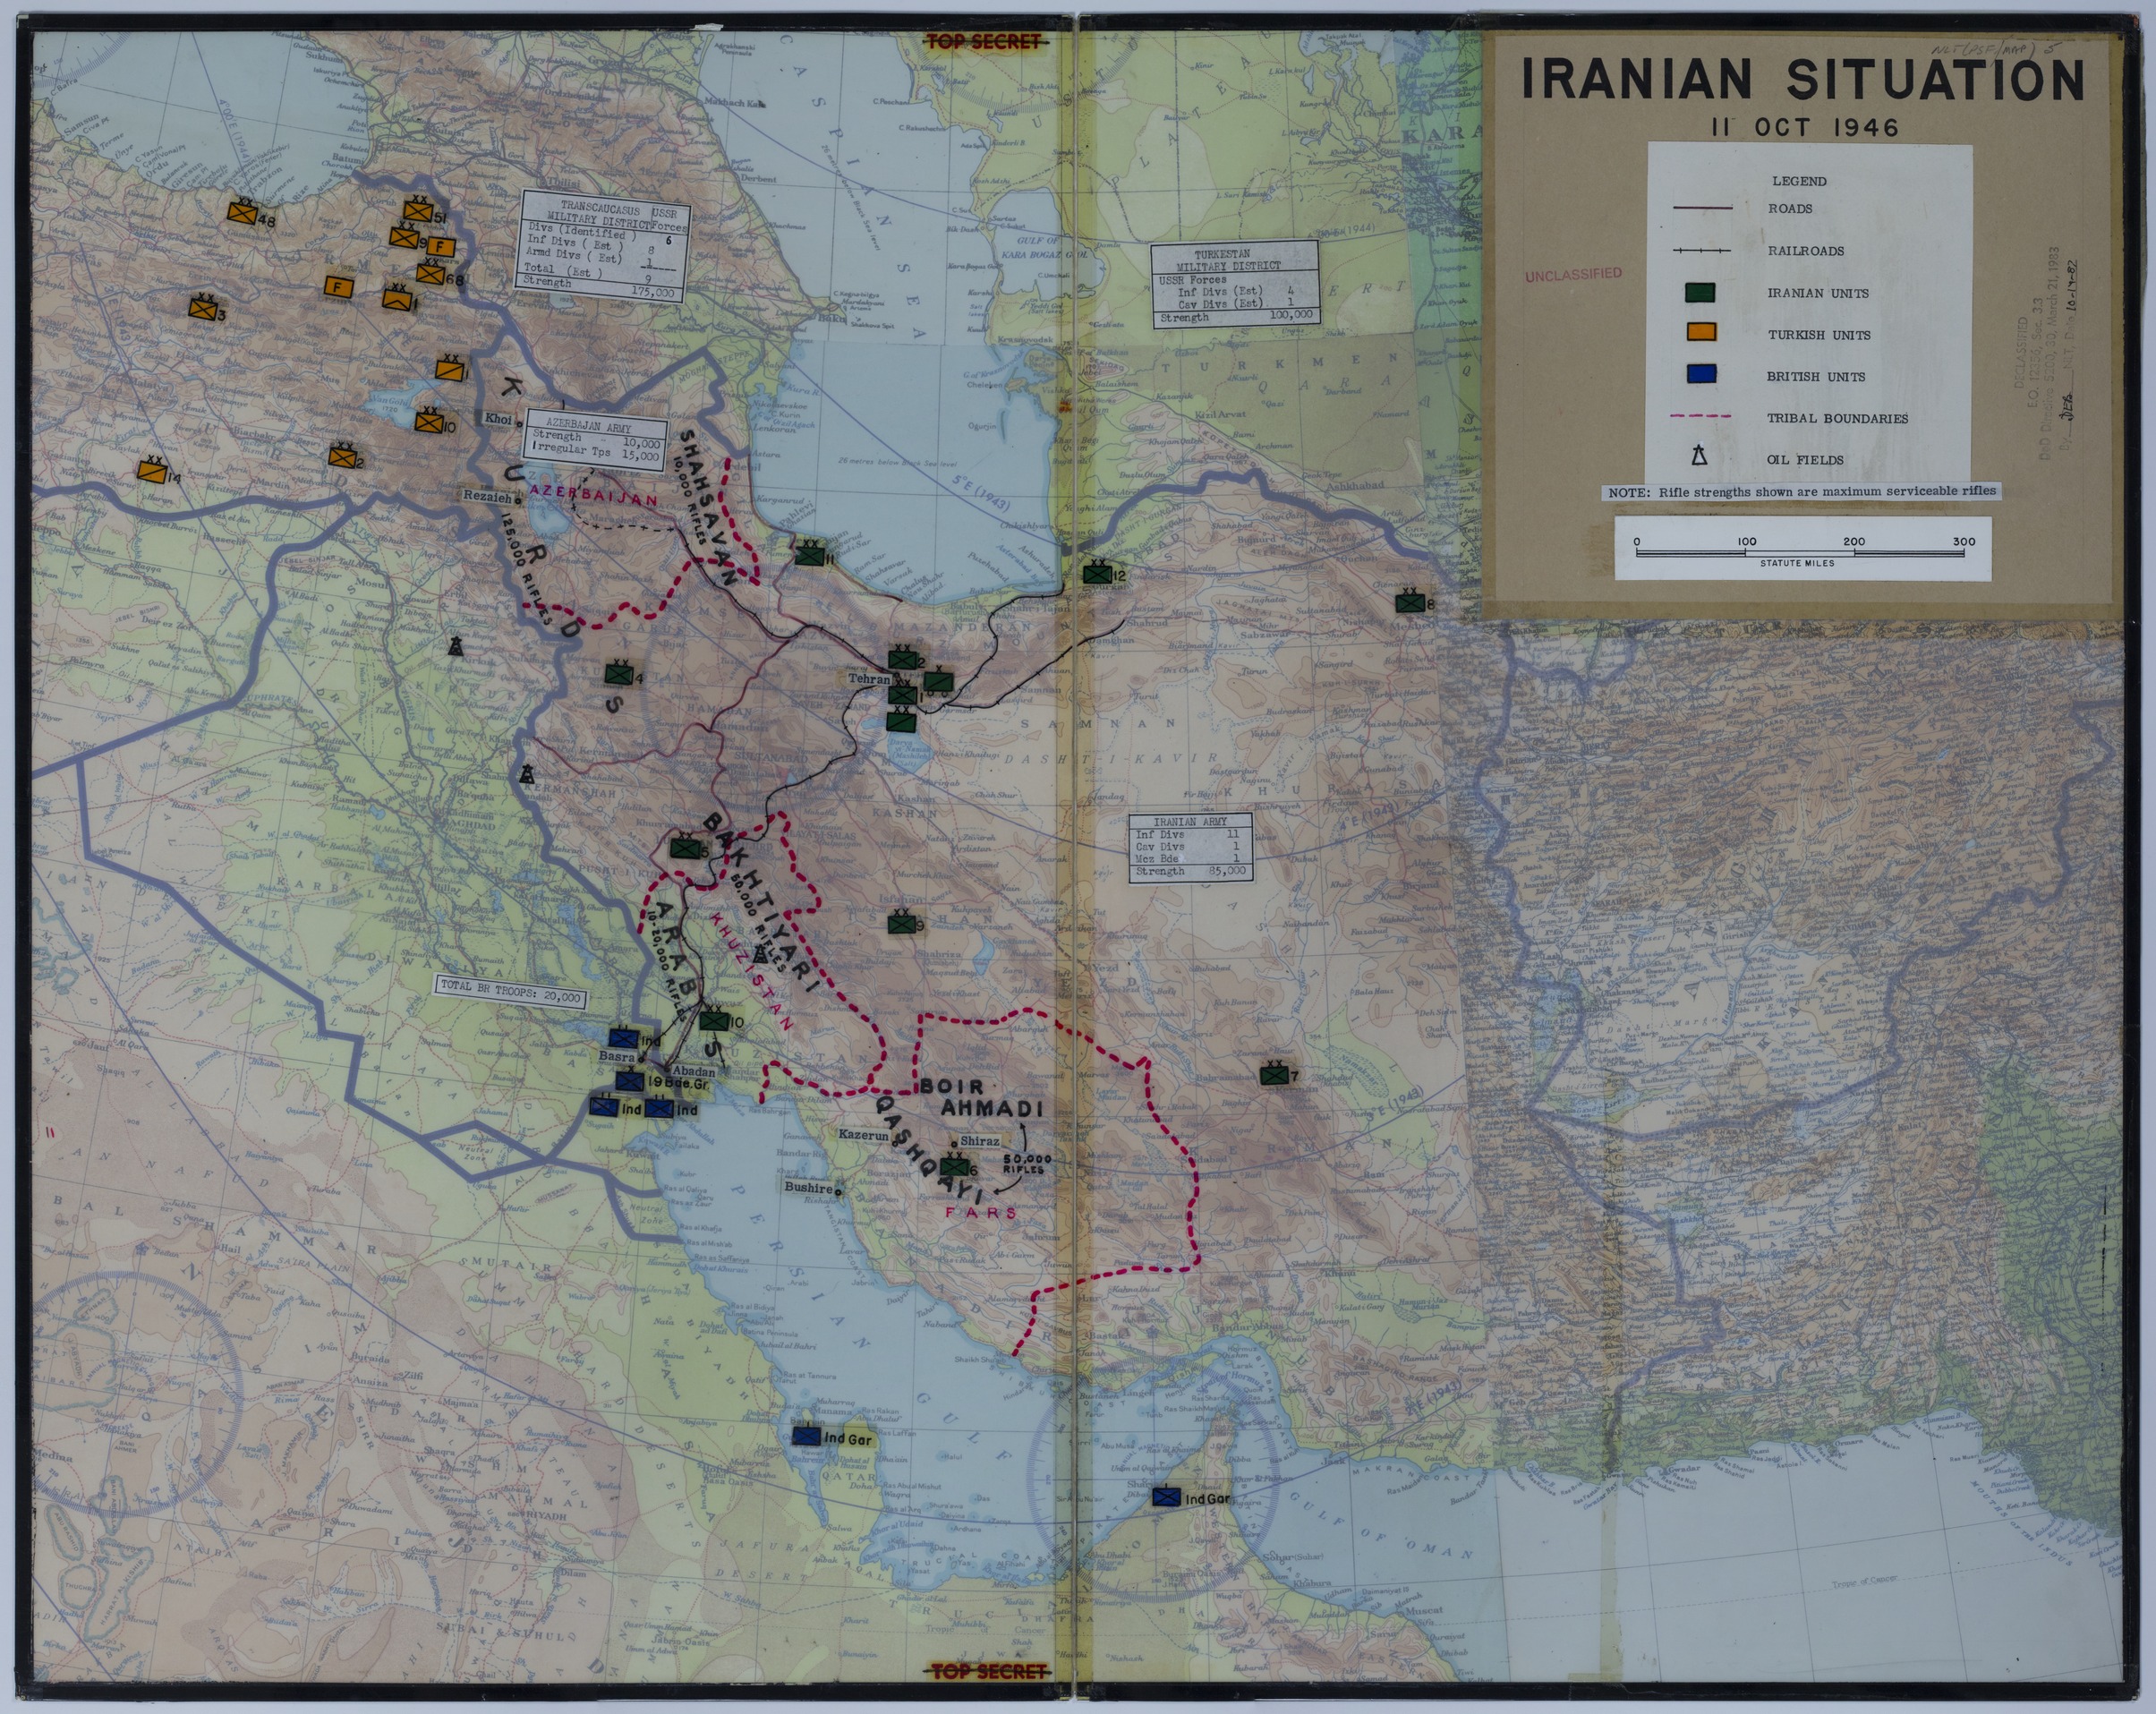 Map of the Situation in Iran as of October 11, 1946